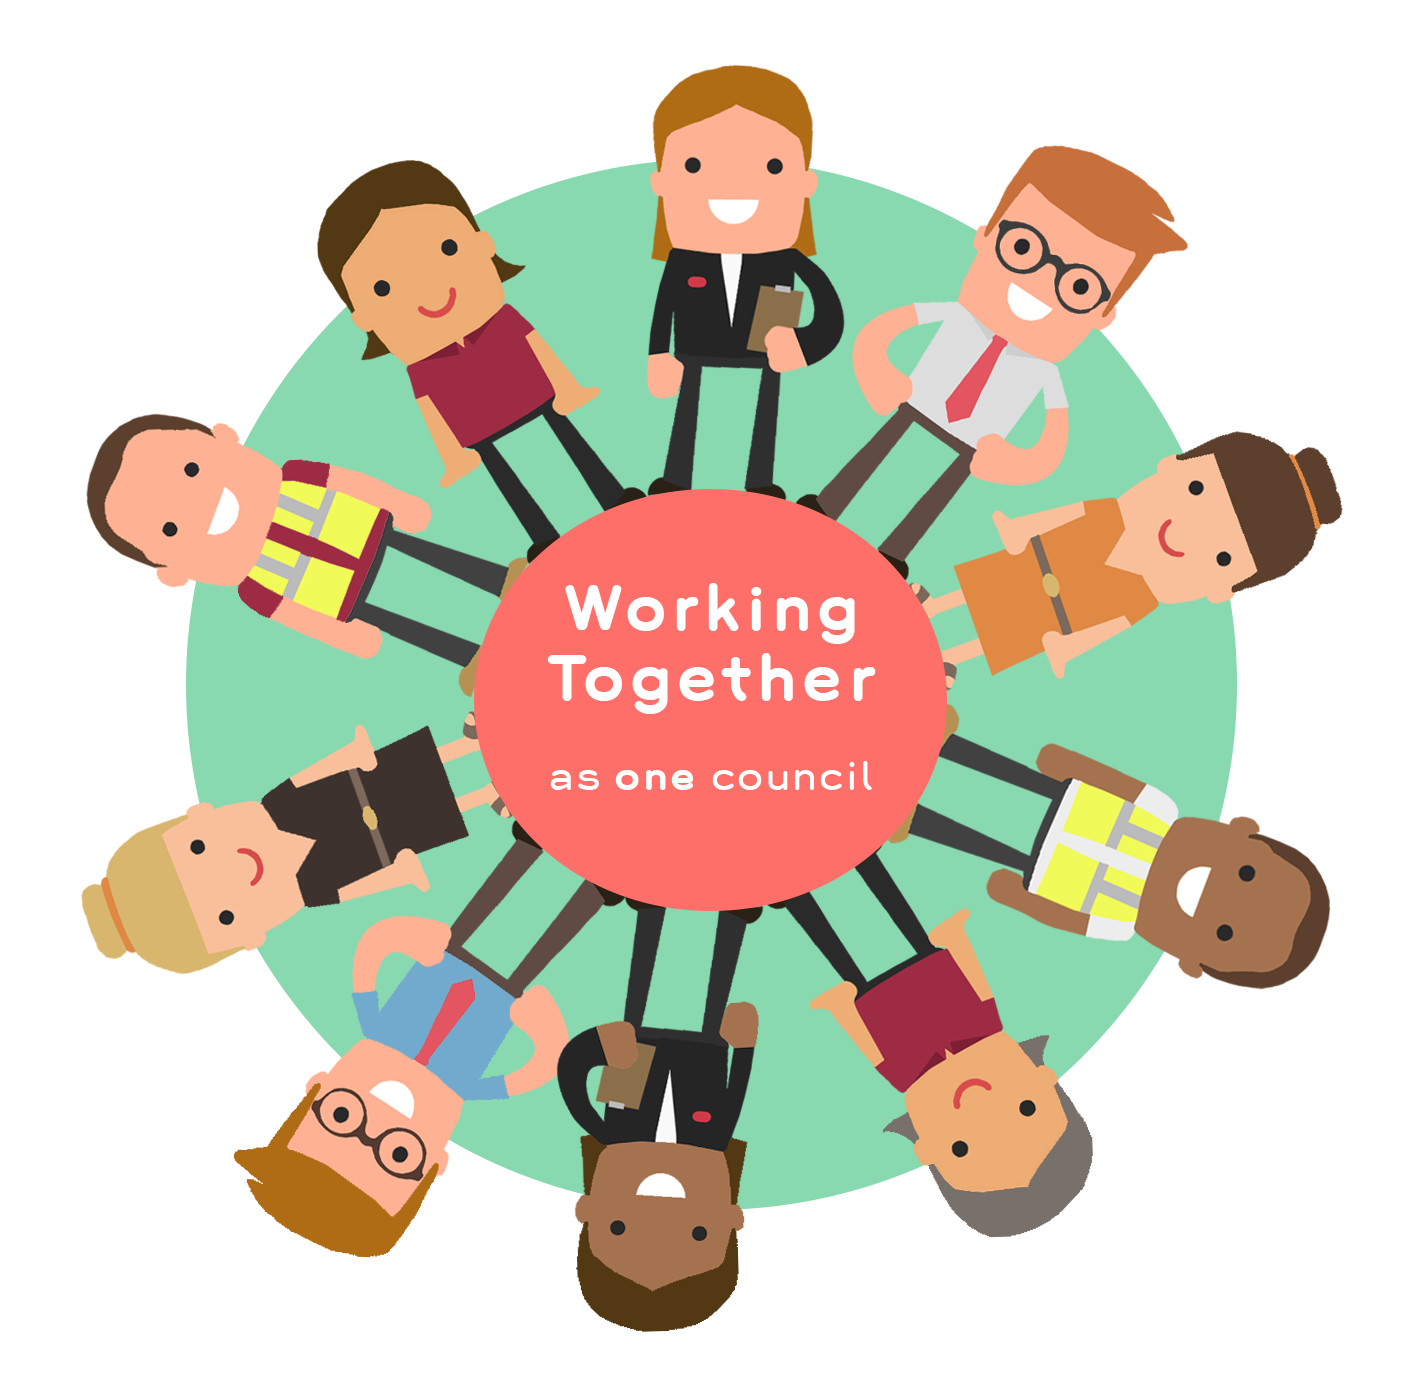 Cartoon style logo with people in a circle around the words Working Together as one council